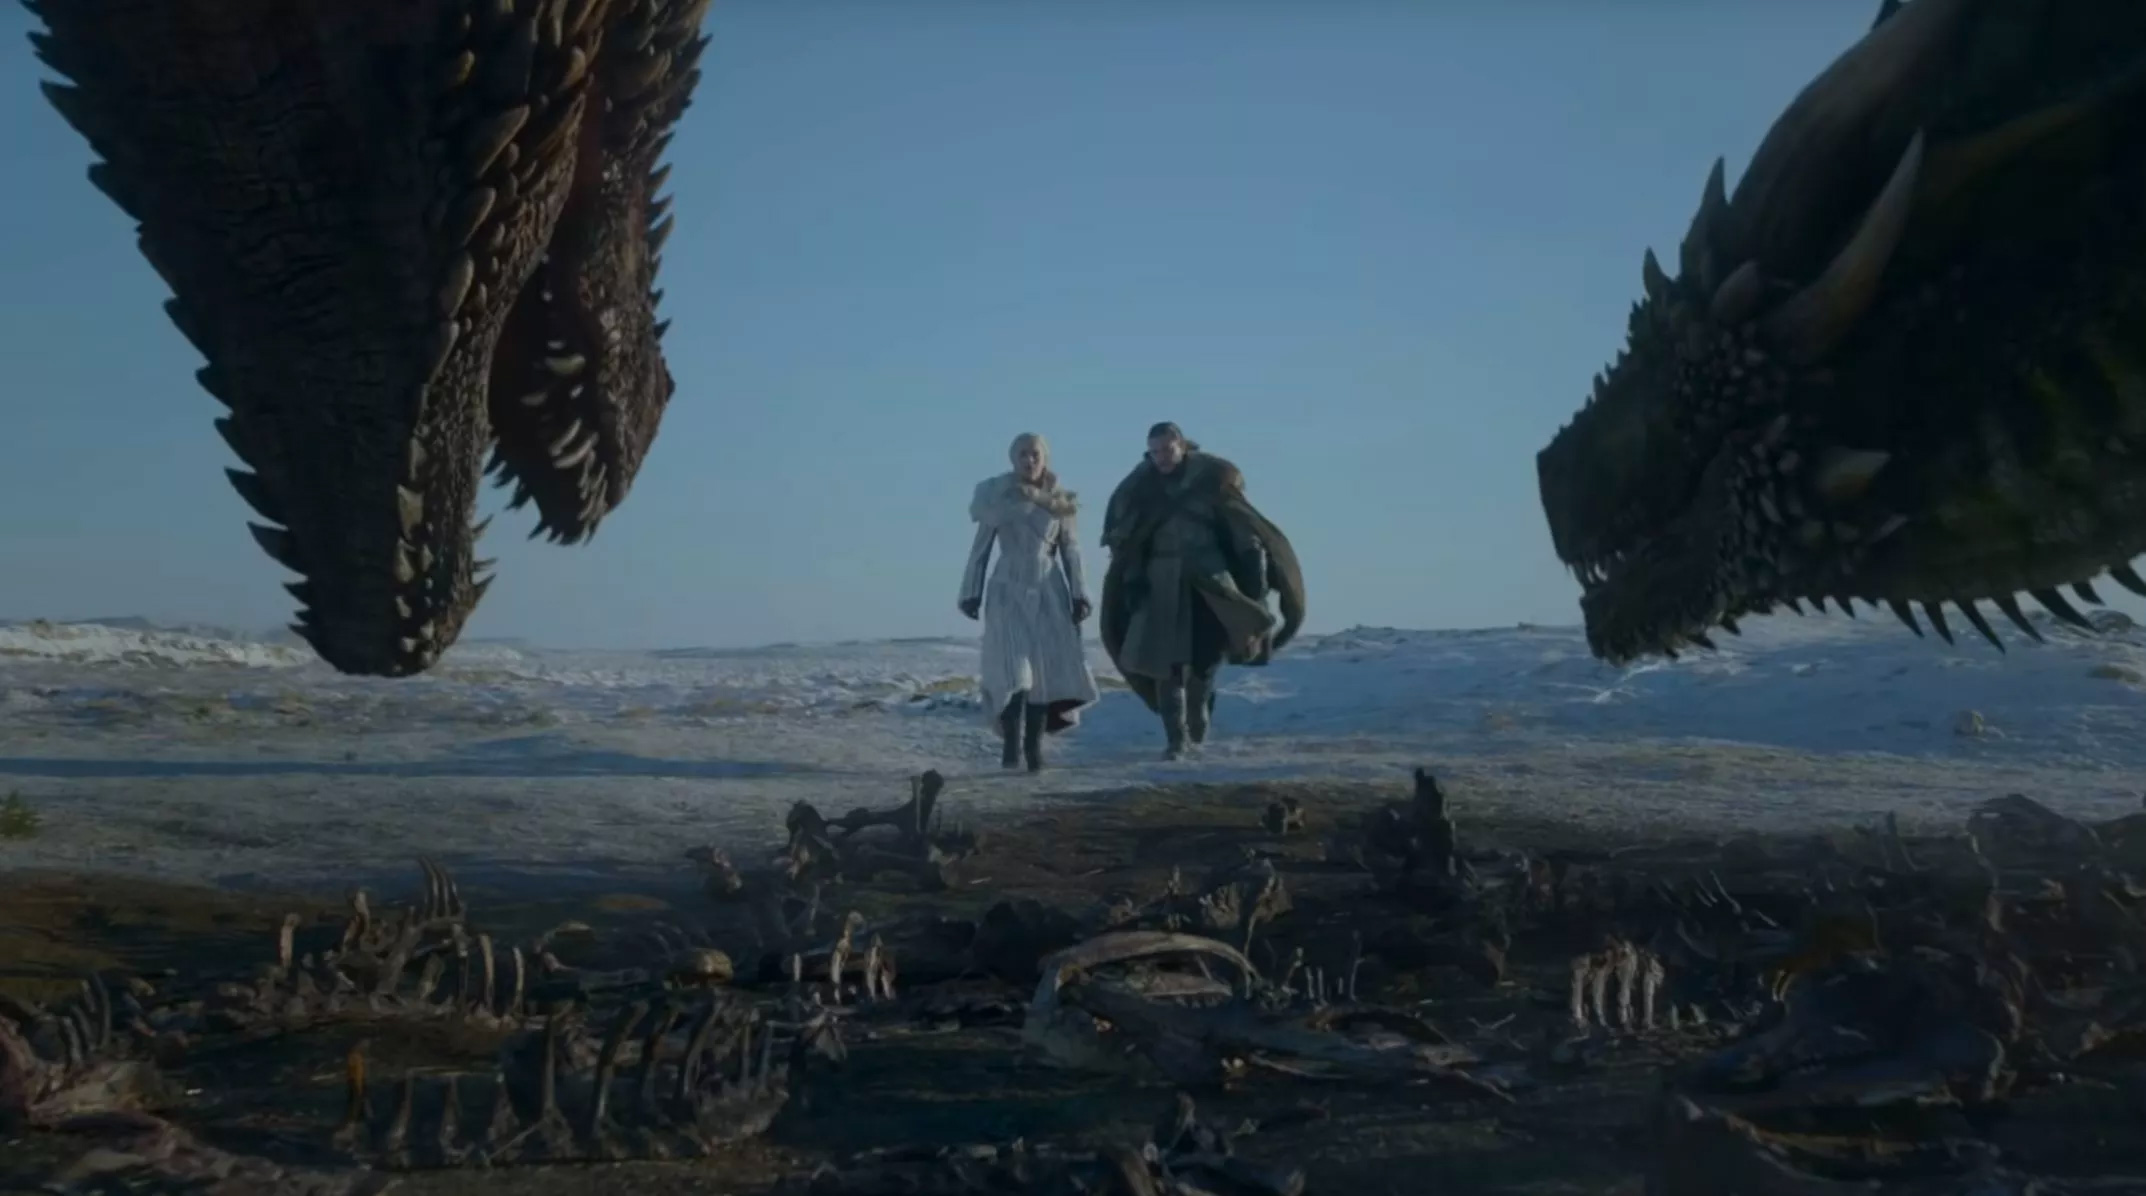 Jon Snow and Daenerys from Game of Thrones shown walking between two dragons